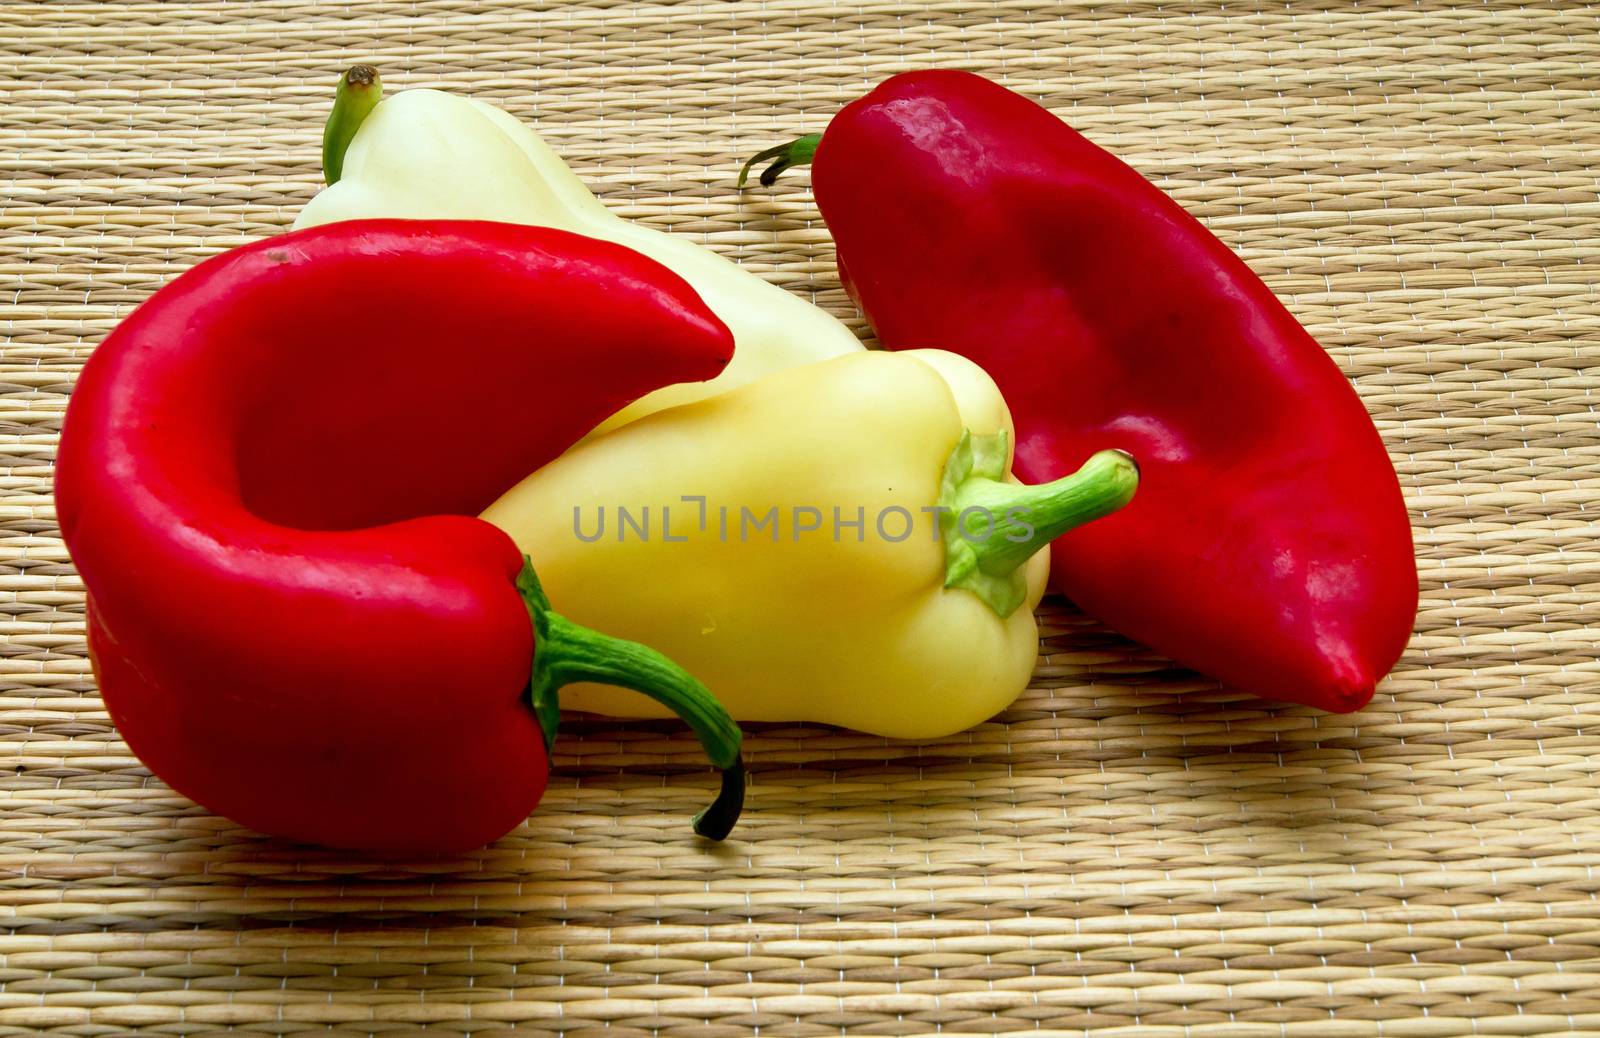 The high vitamin C content of peppers.